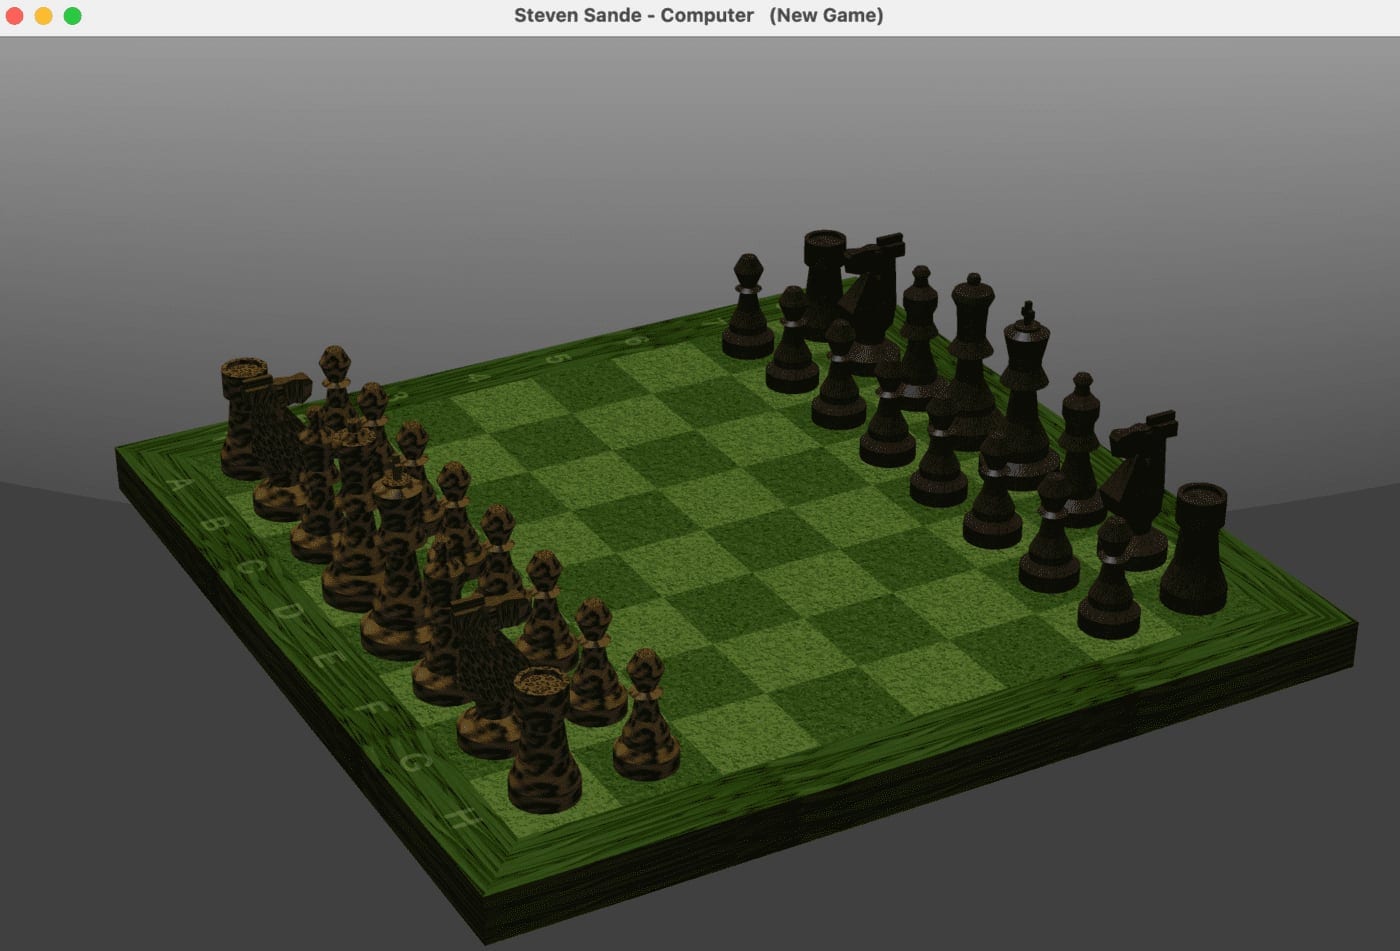 The macOS Chess game, with a grass board and furry pieces...